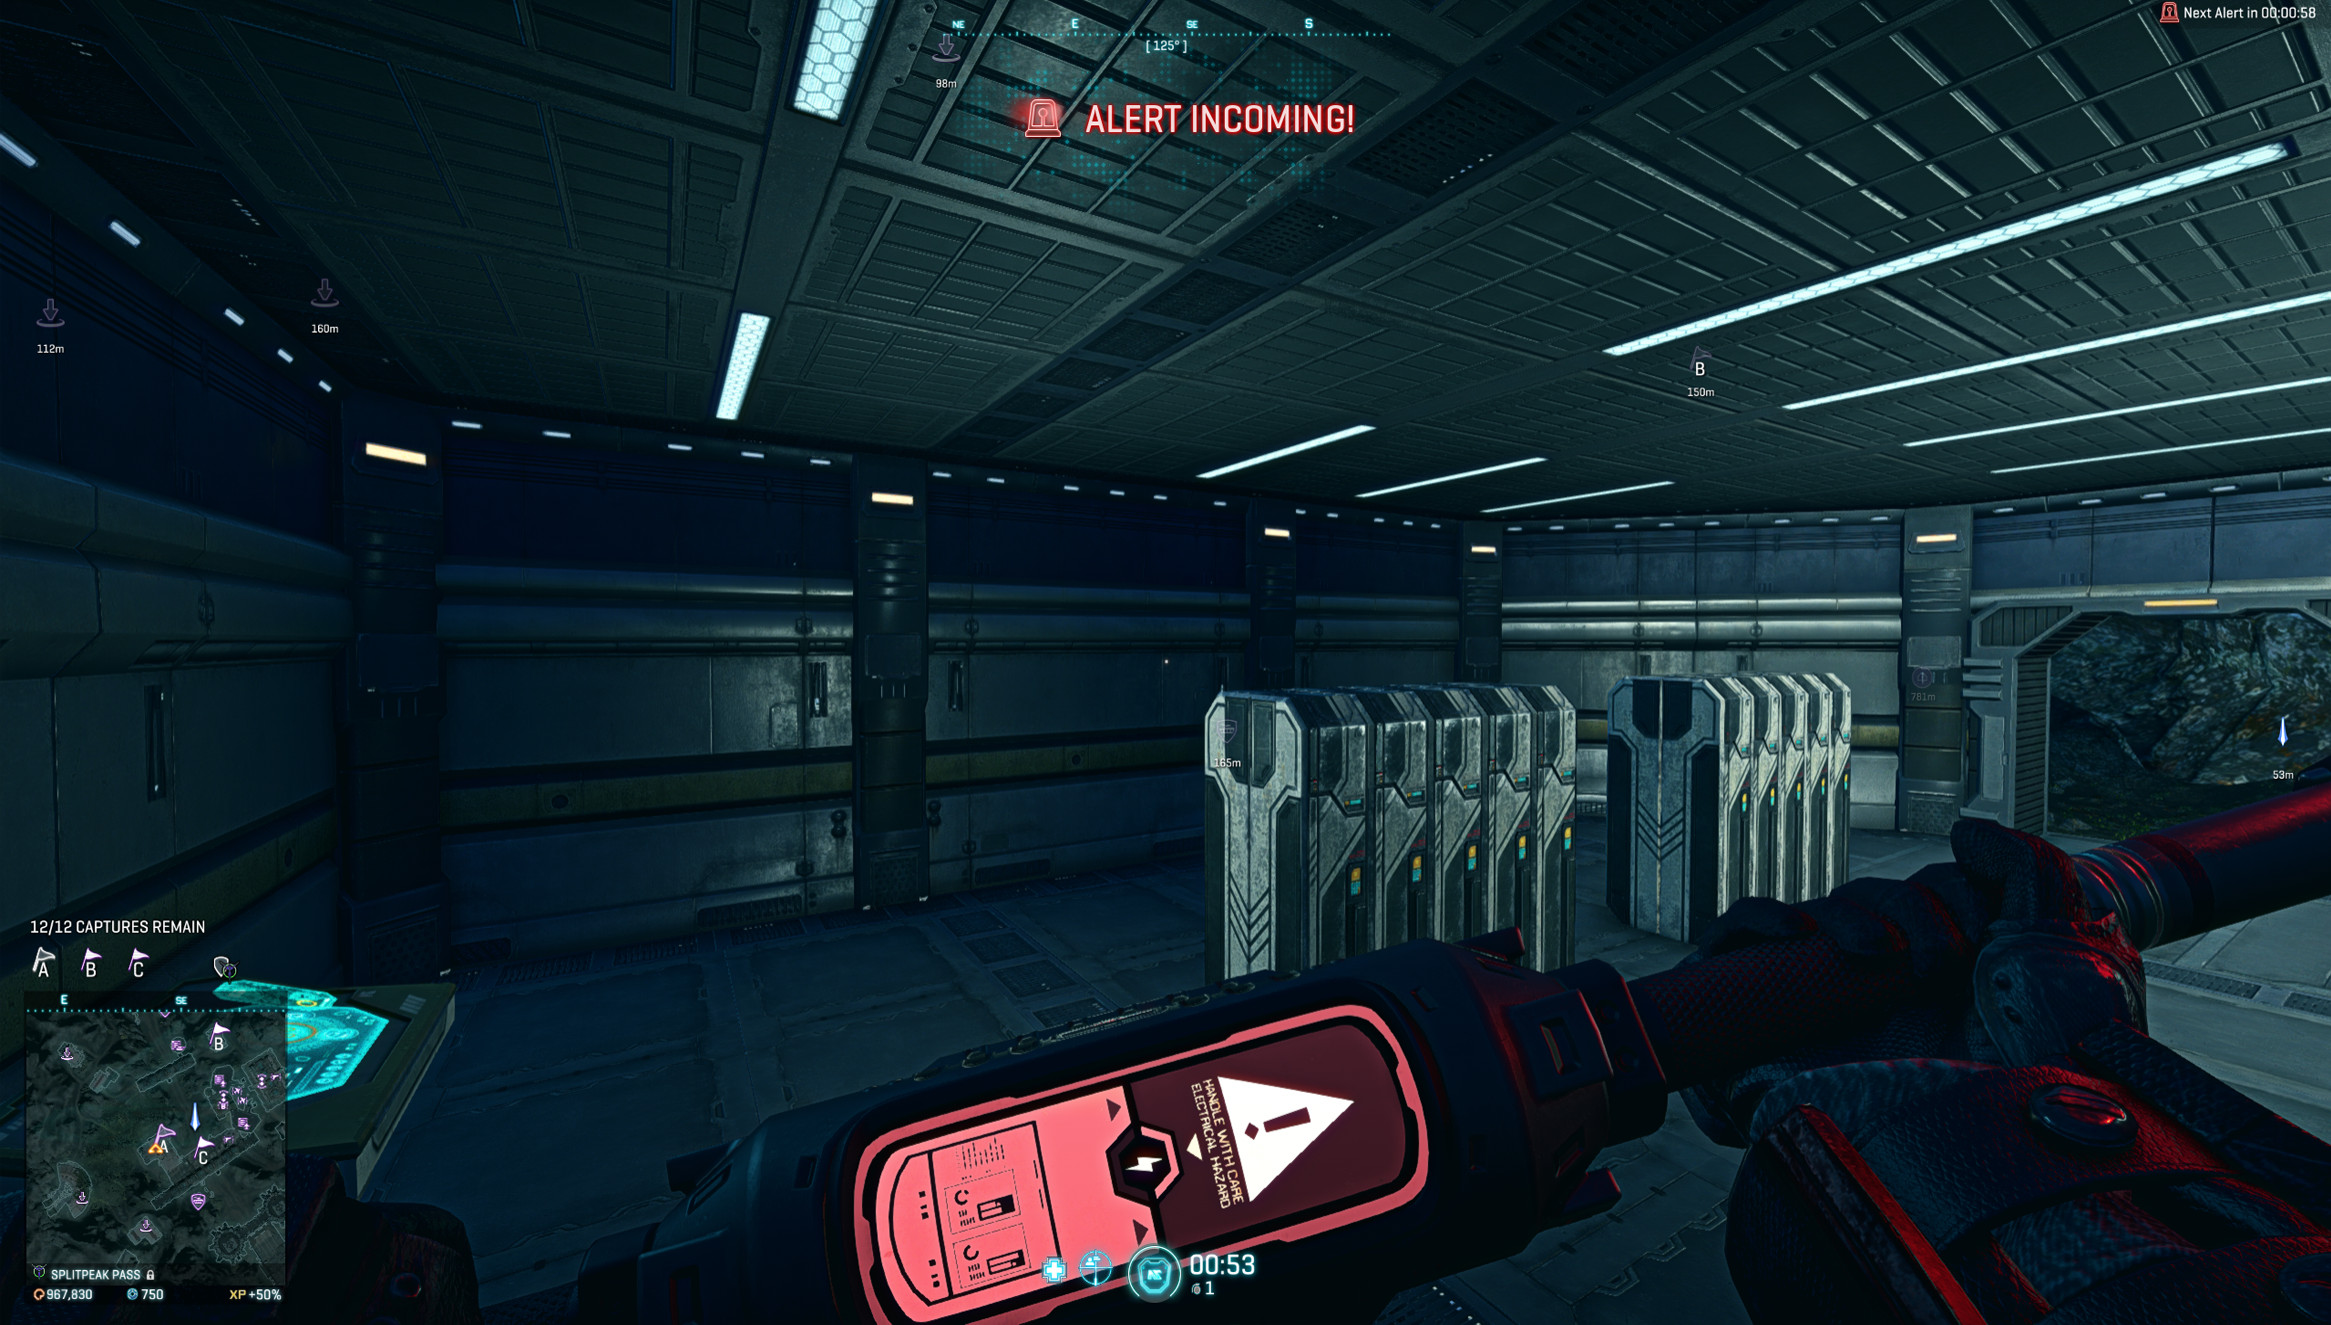 In-game, first person. Flag carrier.